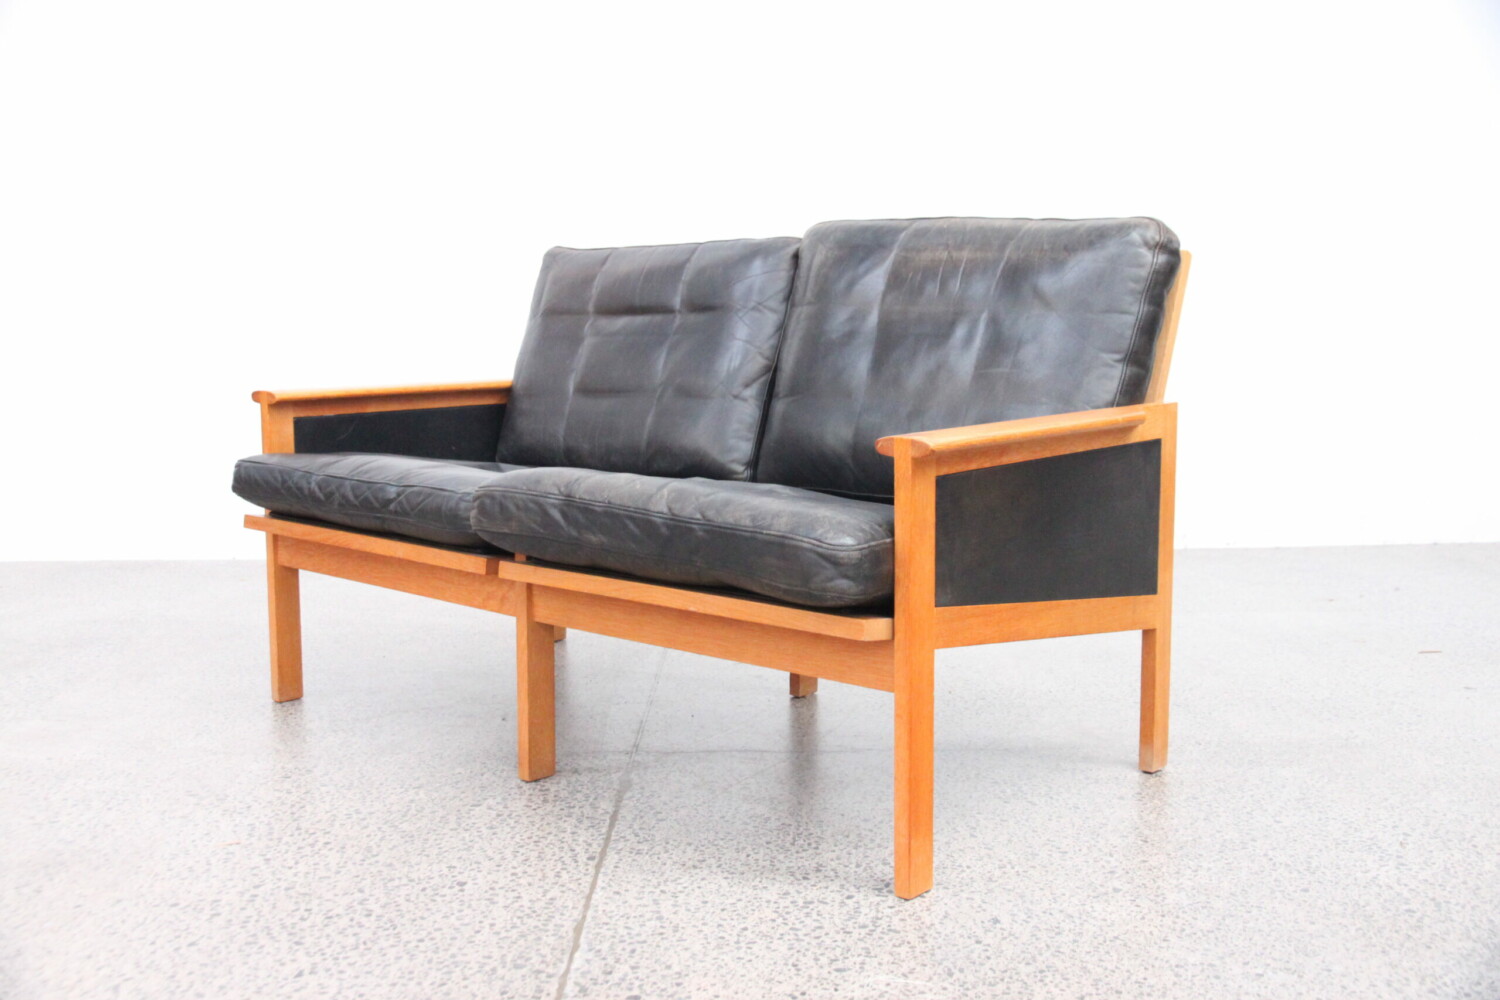 Oak & leather armchairs by Illum Wikkelso